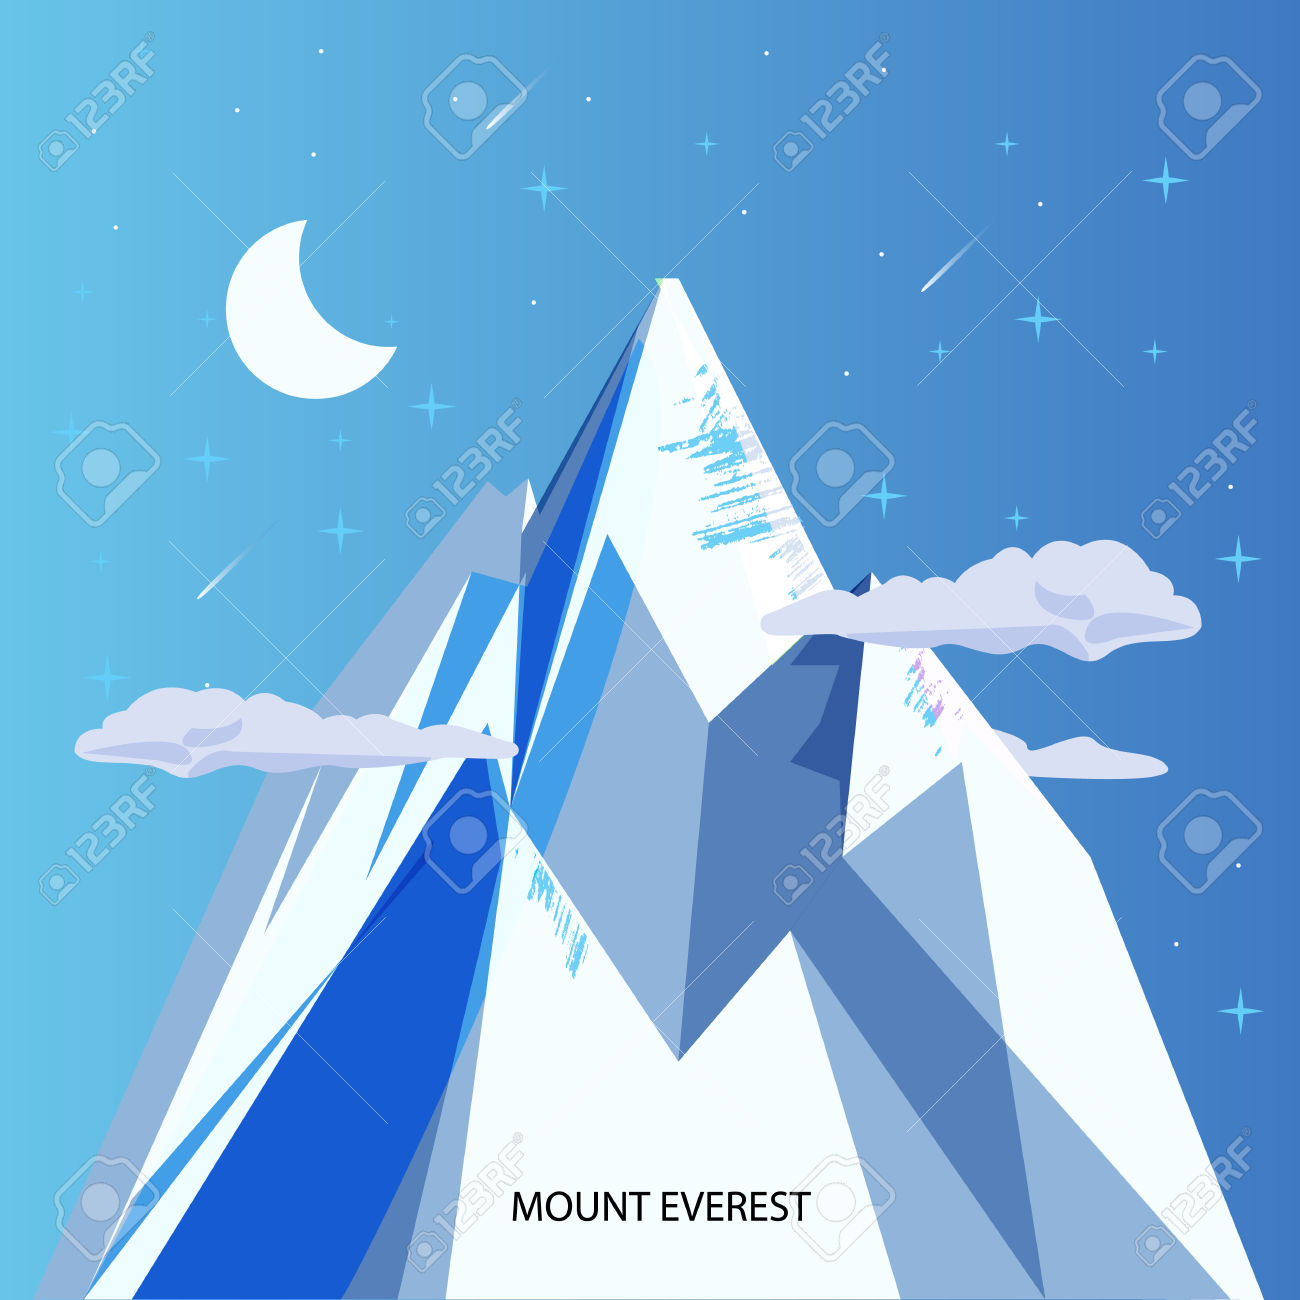 Mount Everest clipart #14, Download drawings